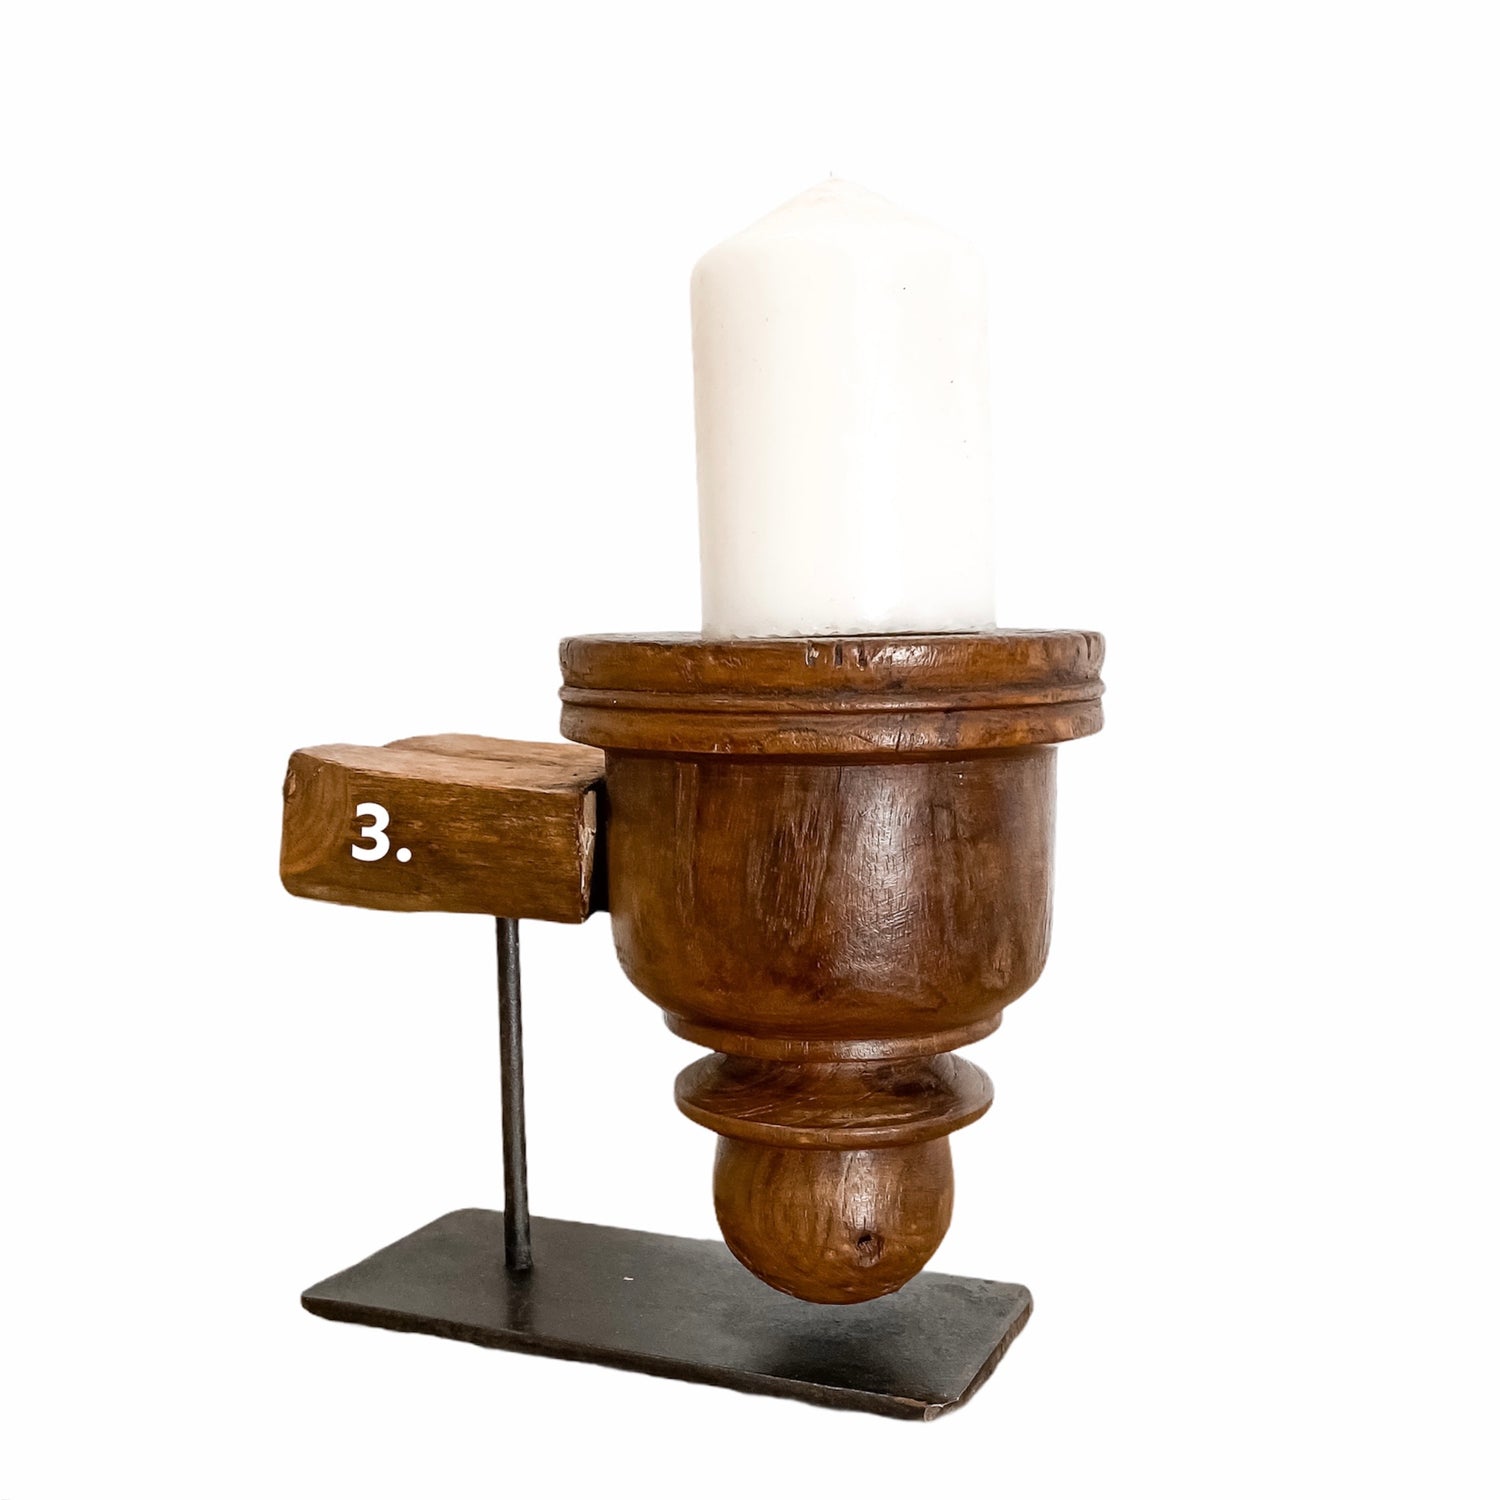 Indian Antique Candle Holder on Stand #3